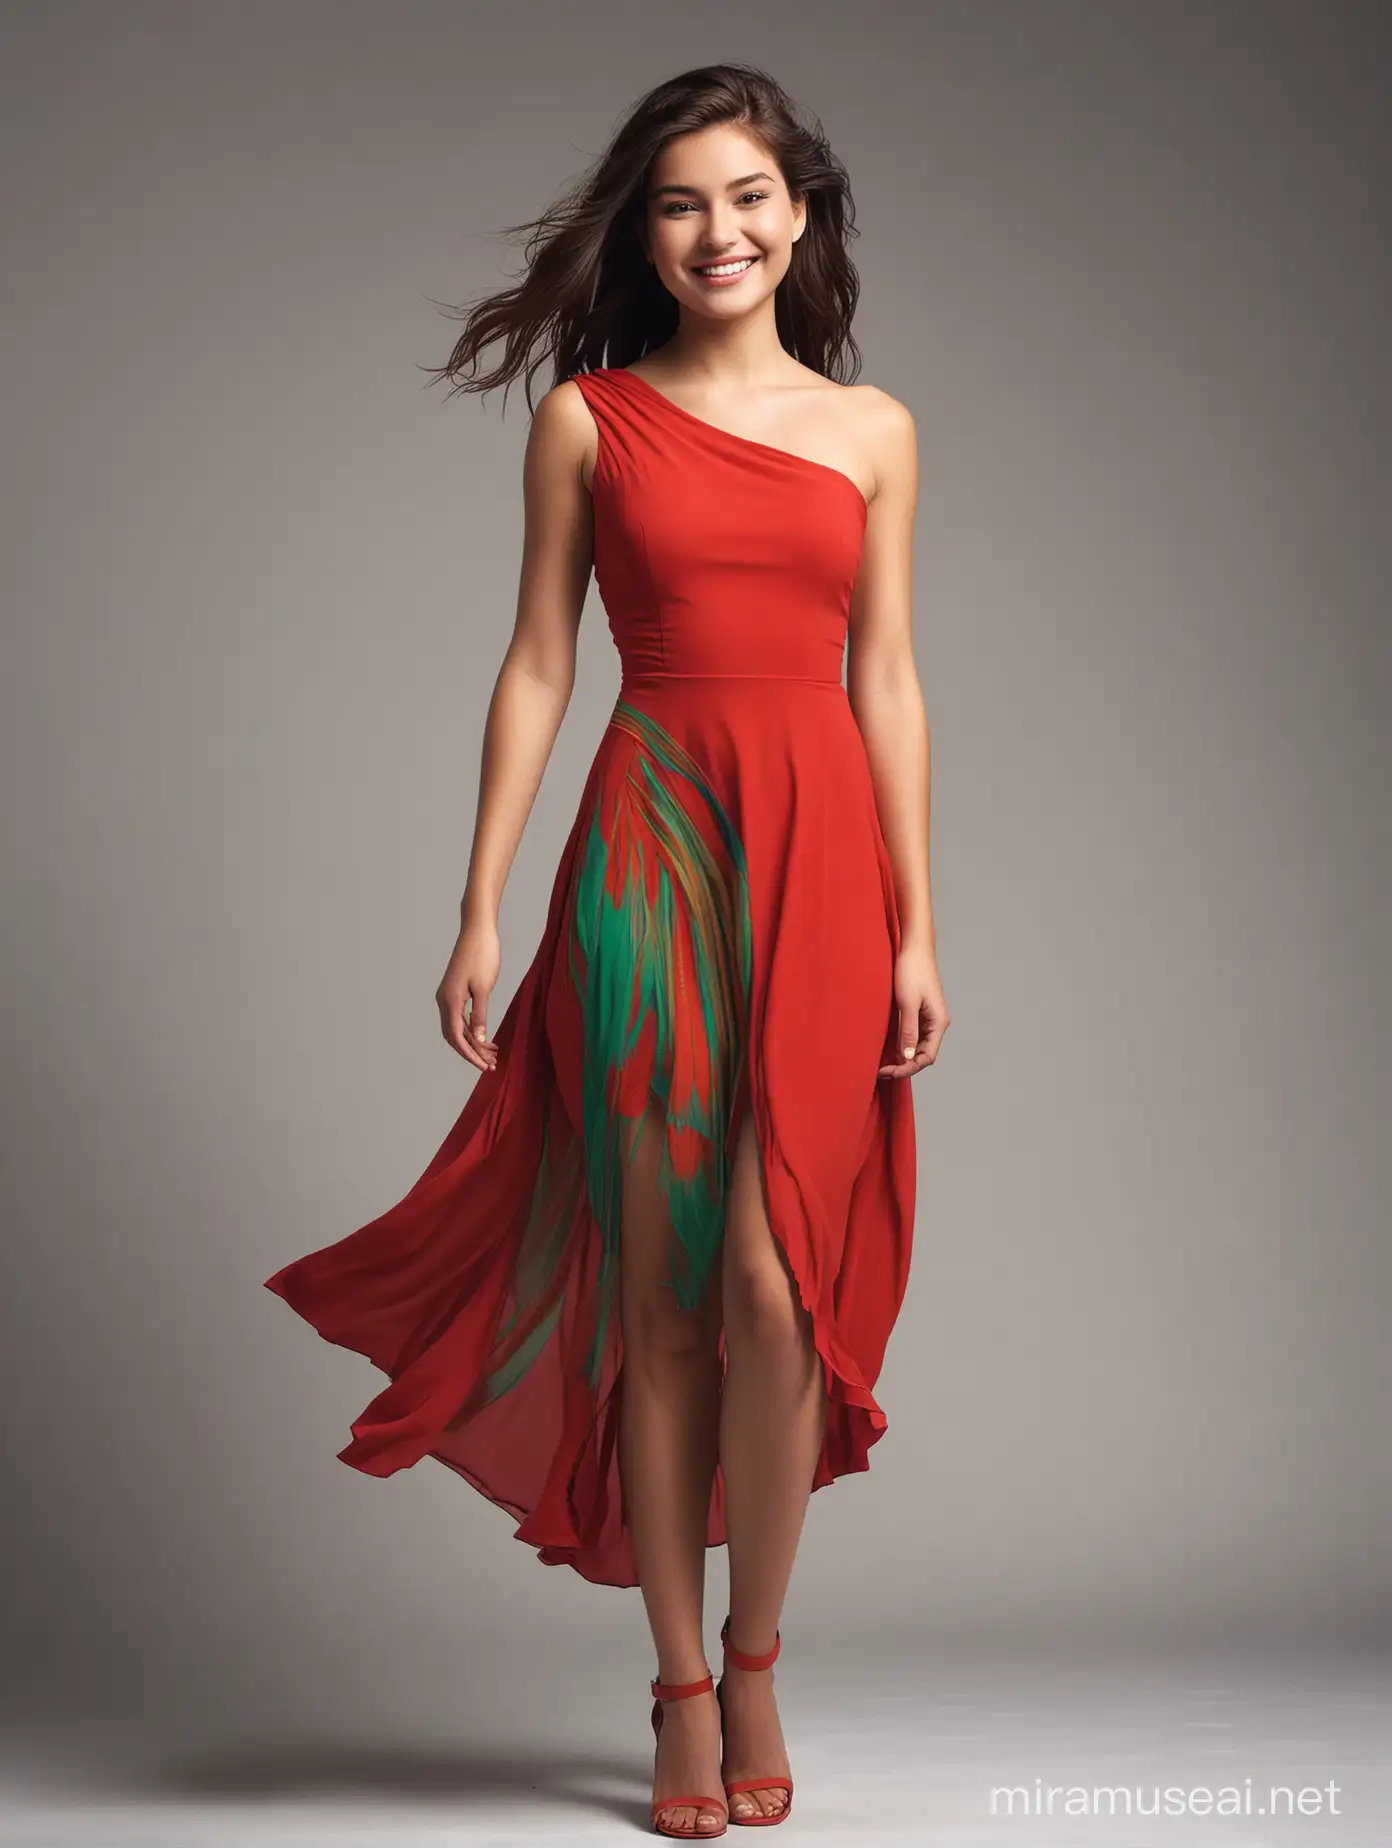 Color photo of a stunning young girl, visible from the waist up, confidently standing on a fashion runway, wearing a stunning and modern red dress, against a simple and isolated background. The girl’s radiant smile and confident looks reflect her inner beauty and strong personality. Her hair flows elegantly, adding to her natural allure. The green dress she wears reflects her modern style, with its vibrant color exuding energy and elegance. The girl has a beautiful perfect body that adds to her allure.

The isolated background highlights the girl’s presence, allowing her to be in the spotlight and captivate viewers with her beauty and elegance. This composition celebrates the girl’s unique beauty, showcasing her grace, confidence, and natural fashion sense. It serves as a reminder that individuality and self-expression are key elements of true beauty. The vibrant red color adds a touch of excitement, symbolizing youth and a zest for life.